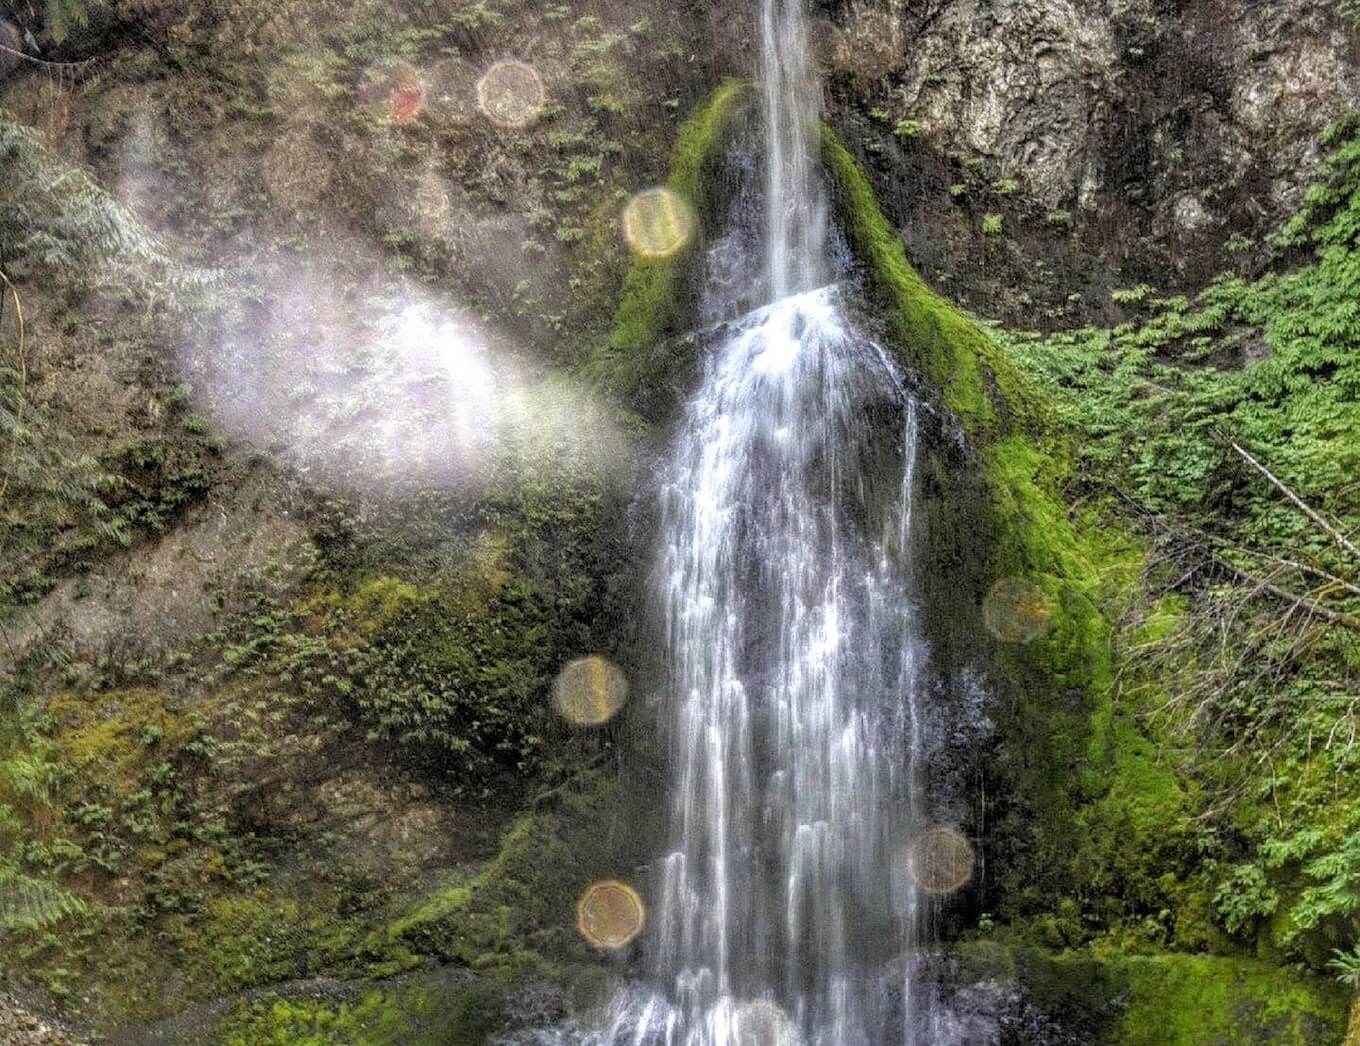 An image of a waterfall in the sunlight, showing an example of lens flares.